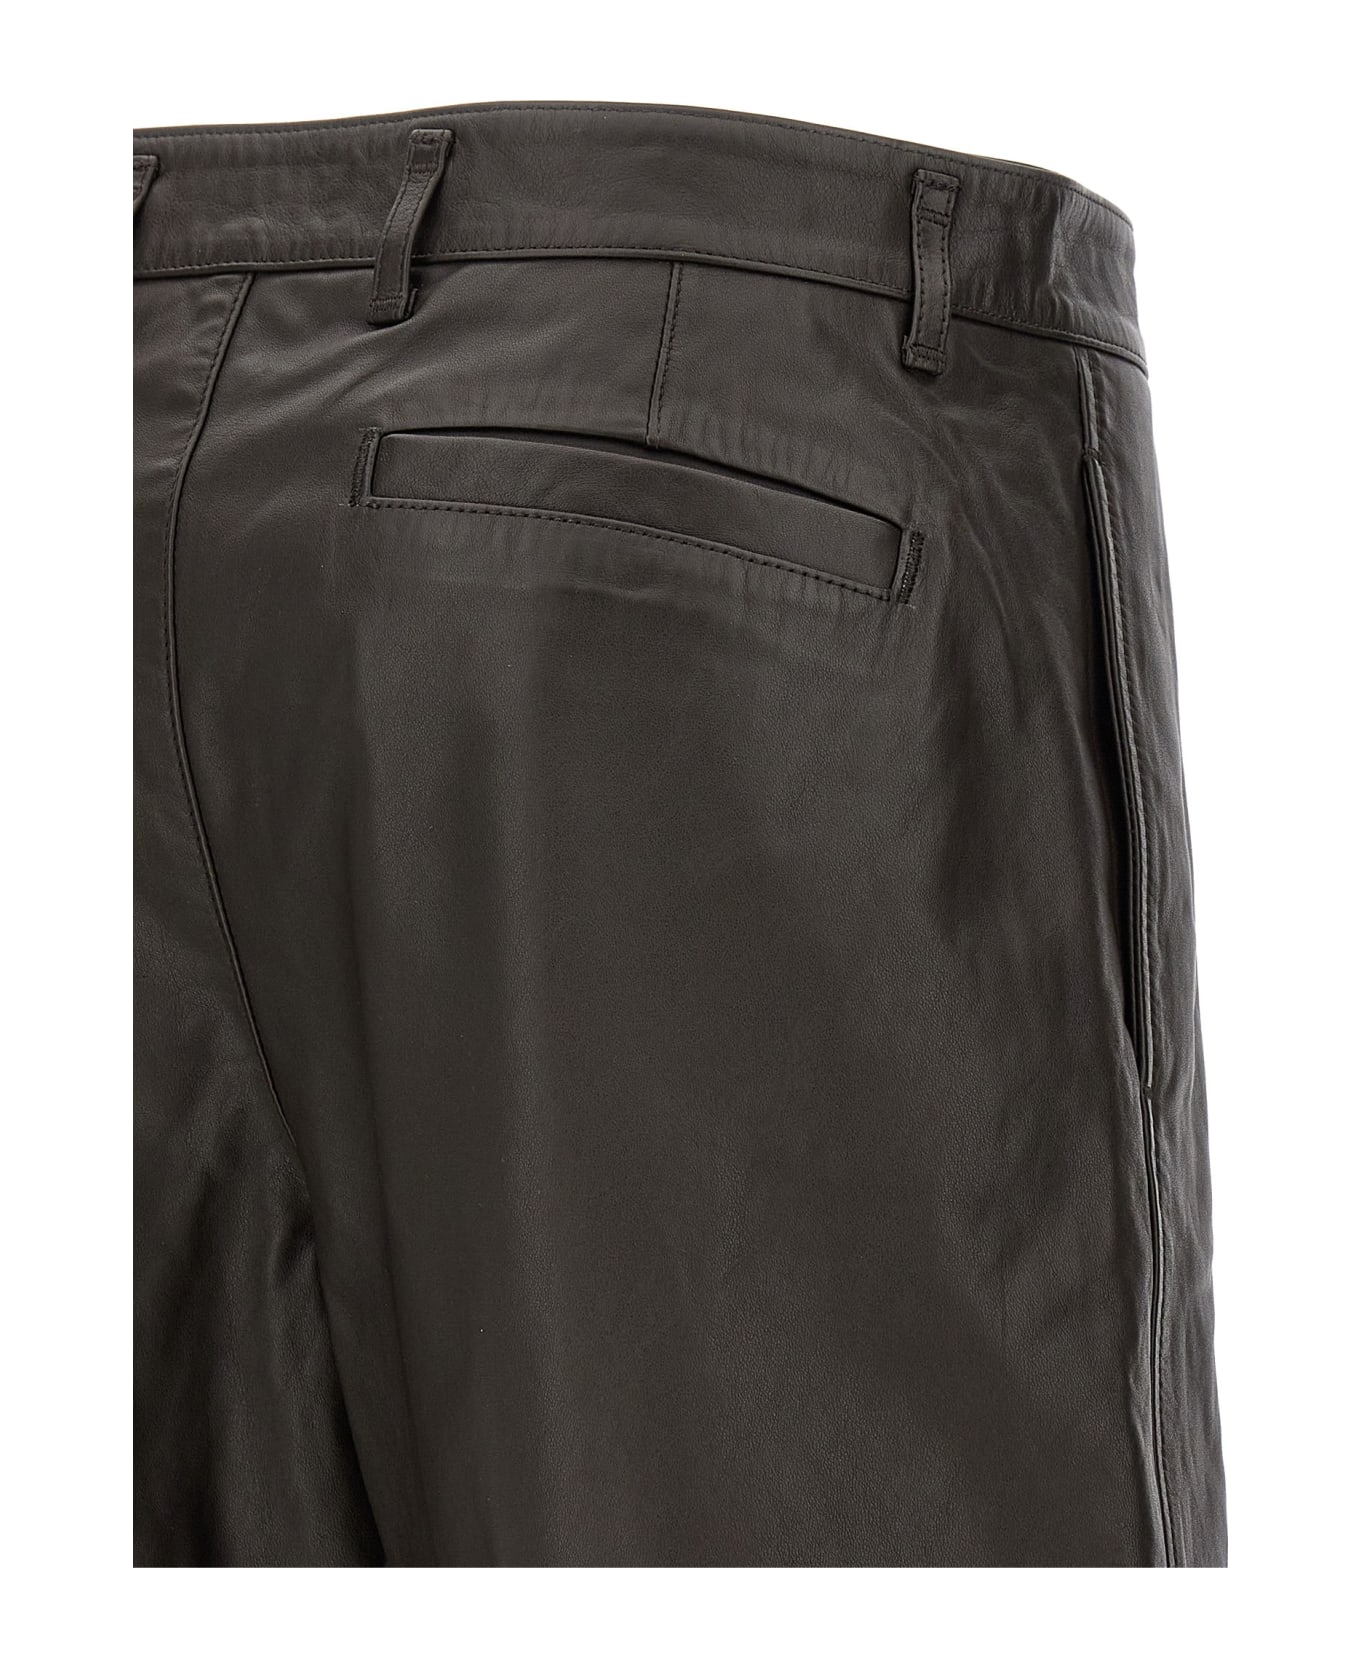 Lemaire Leather Bermuda Shorts - BROWN ショートパンツ